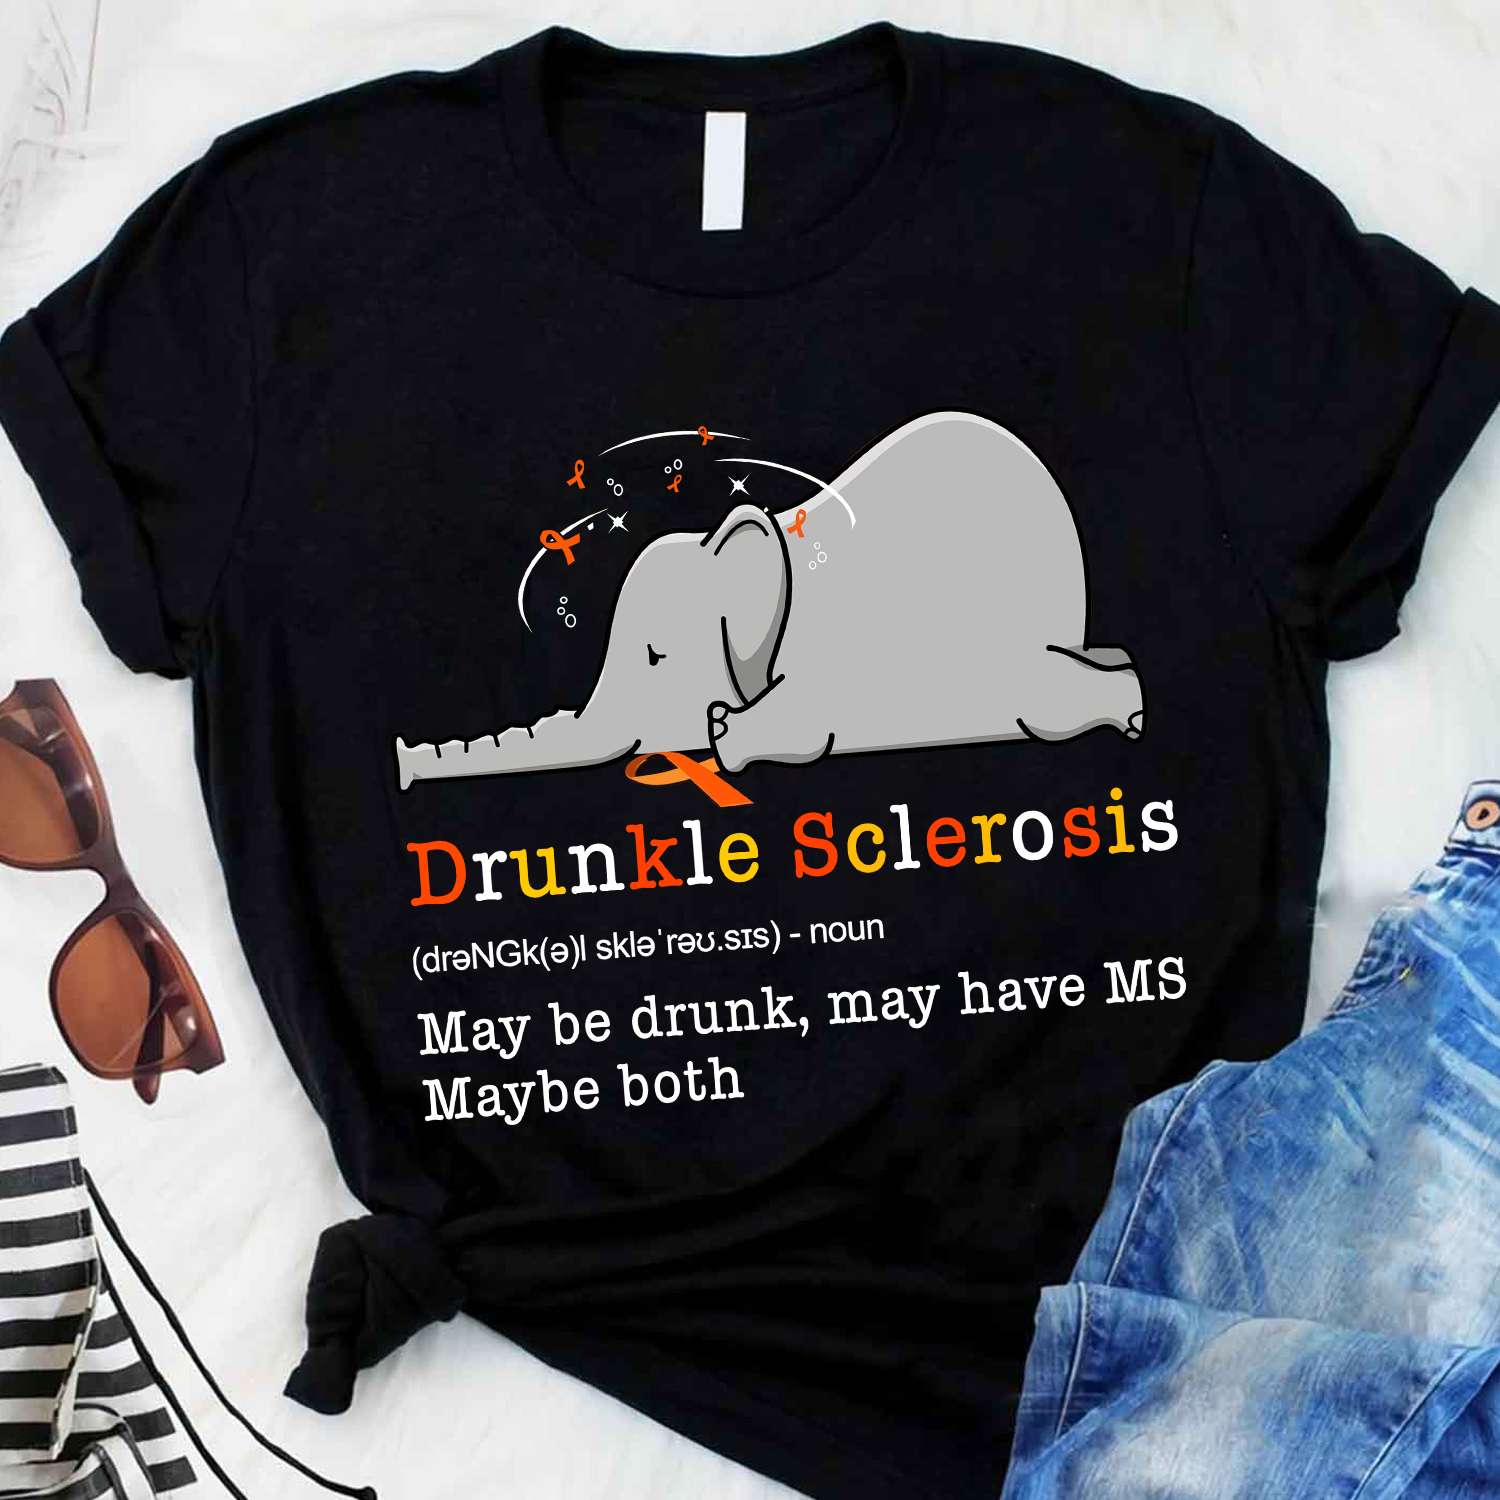 Elephant multiple sclerosis awareness - Drunkle sclerosis may be drunk may have MS maybe both